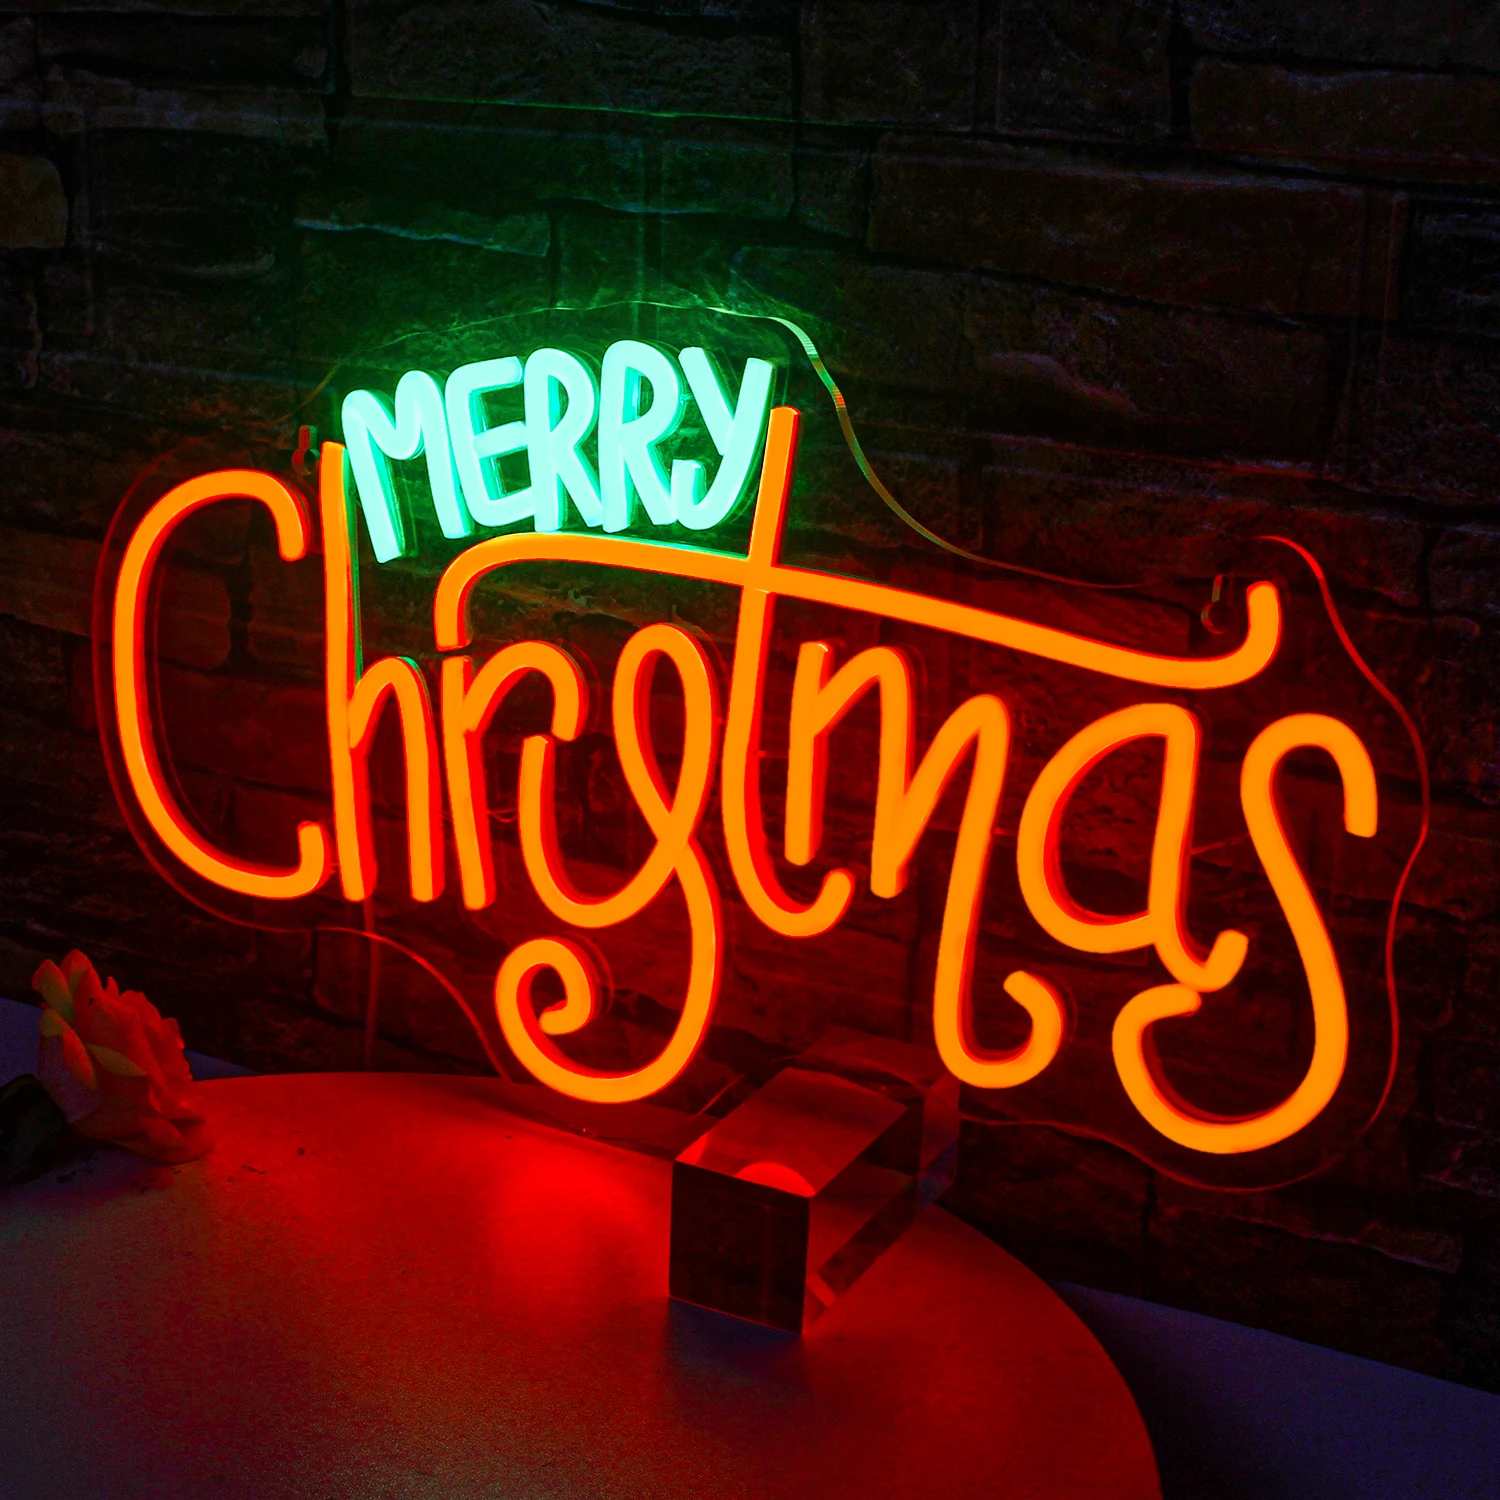 Merry Christmas Neon Sign Led Neon Light Wall Decor Usb Light Up Sign Bedroom Home Party Christmas Decorations Family Kids Gifts ineonlife neon lights hey baby sign led lamps wedding proposal party art decorations children birthday room colour lights